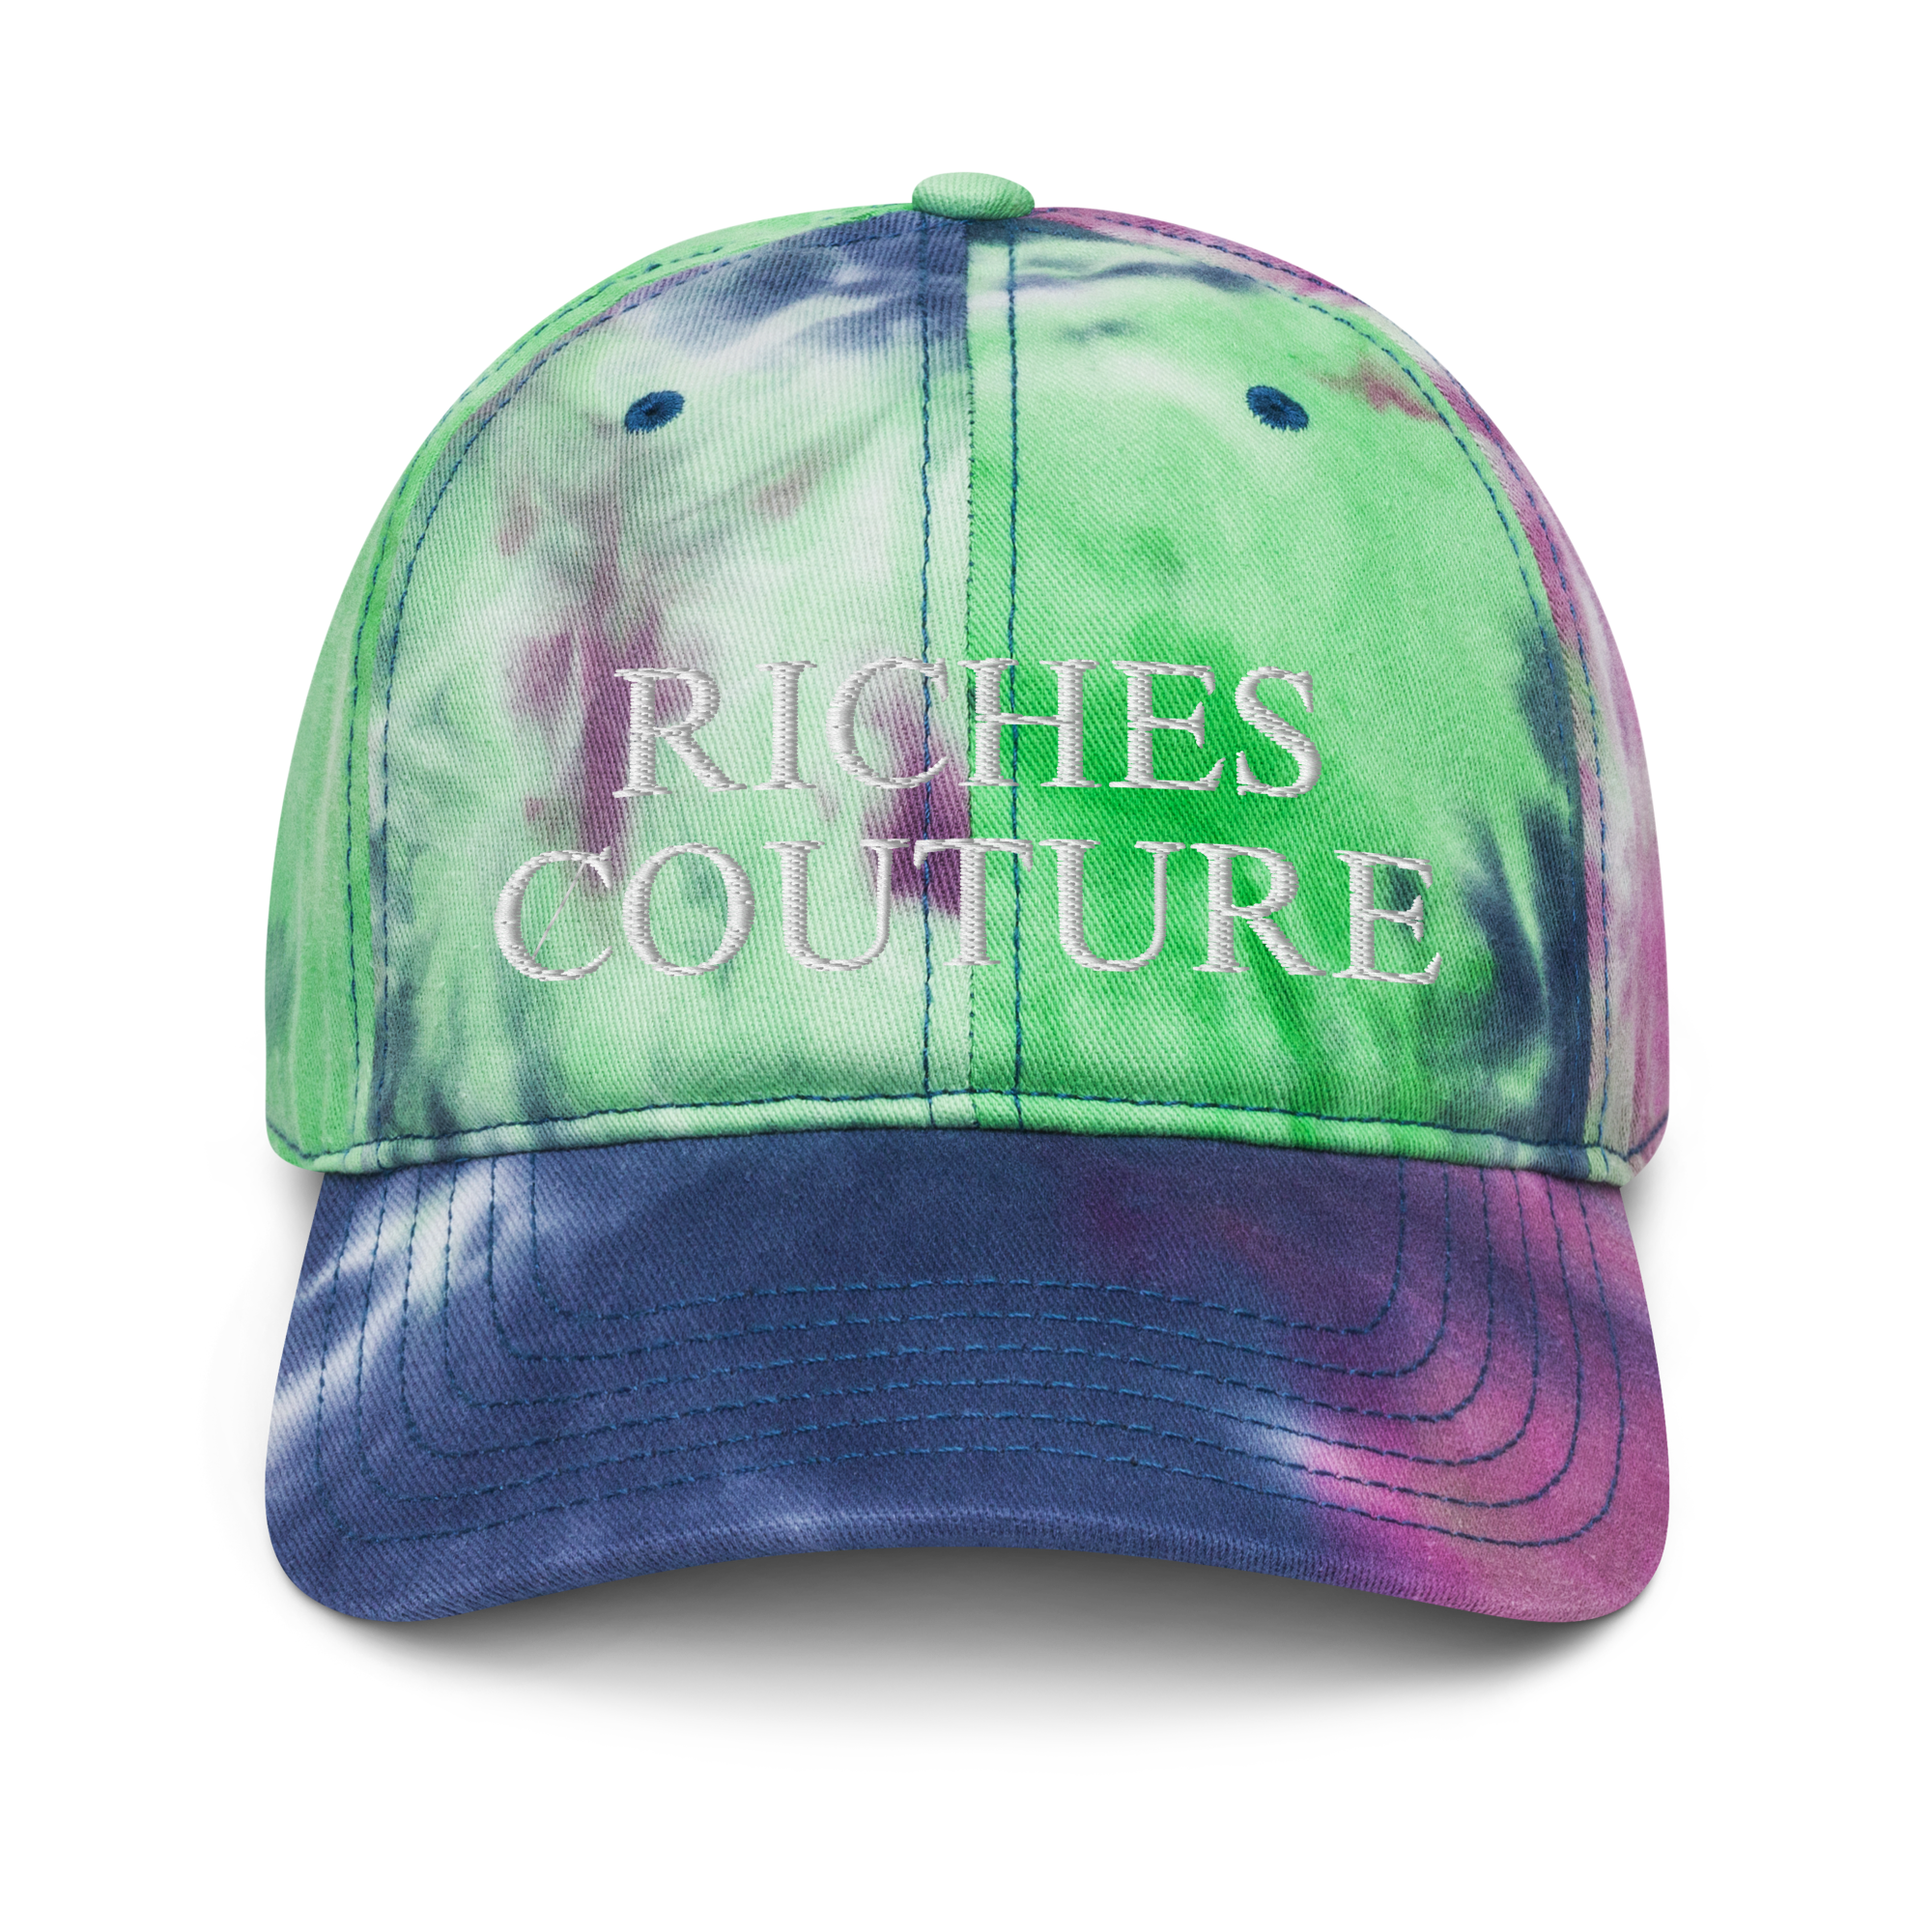 Riches Couture Expressions Hat